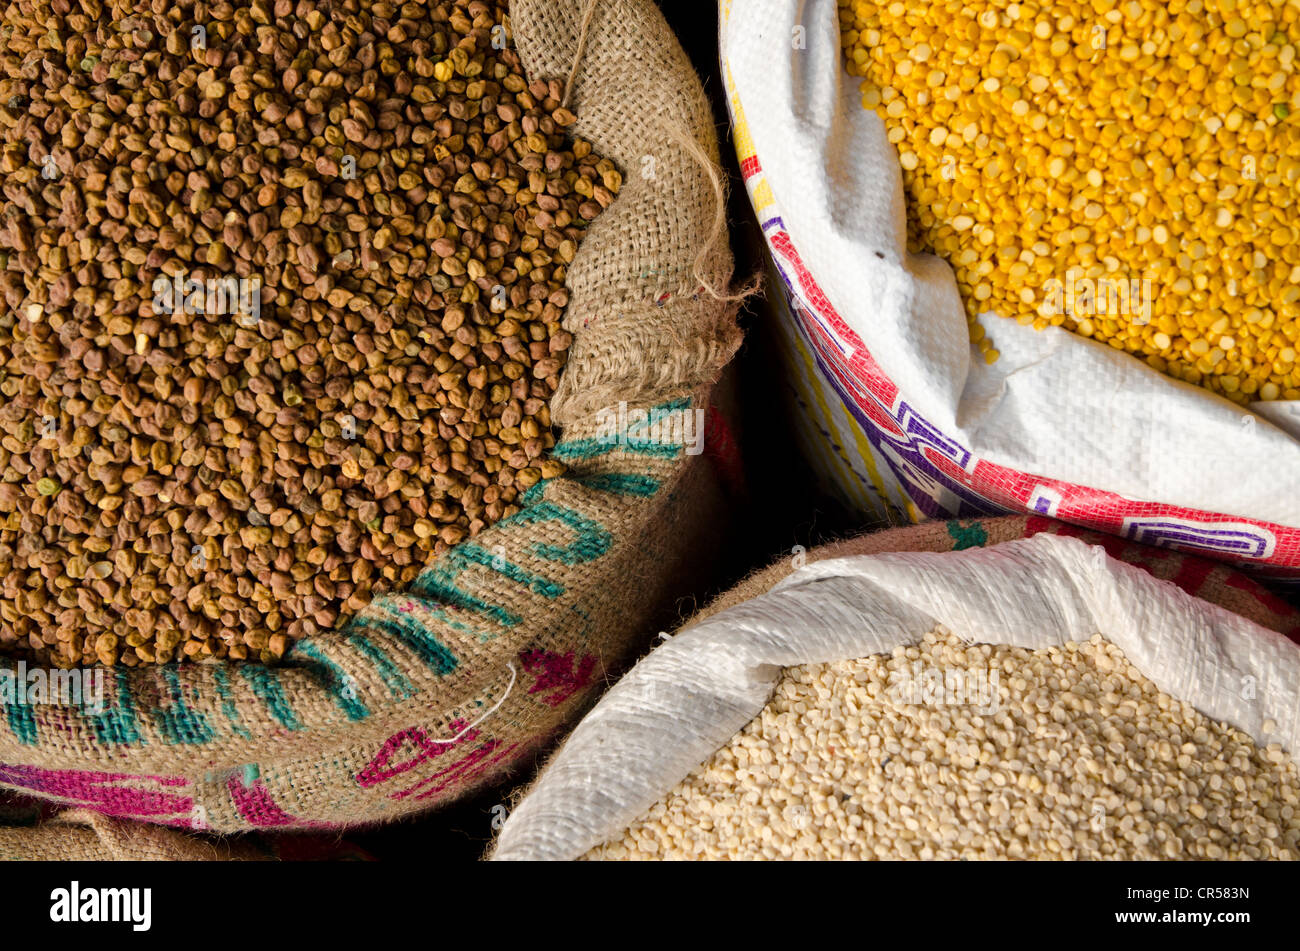 Moong Dhal, Urid Dhal and other types of lentils for sale on the market in the suburb of Paharganj, New Delhi, India, Asia Stock Photo